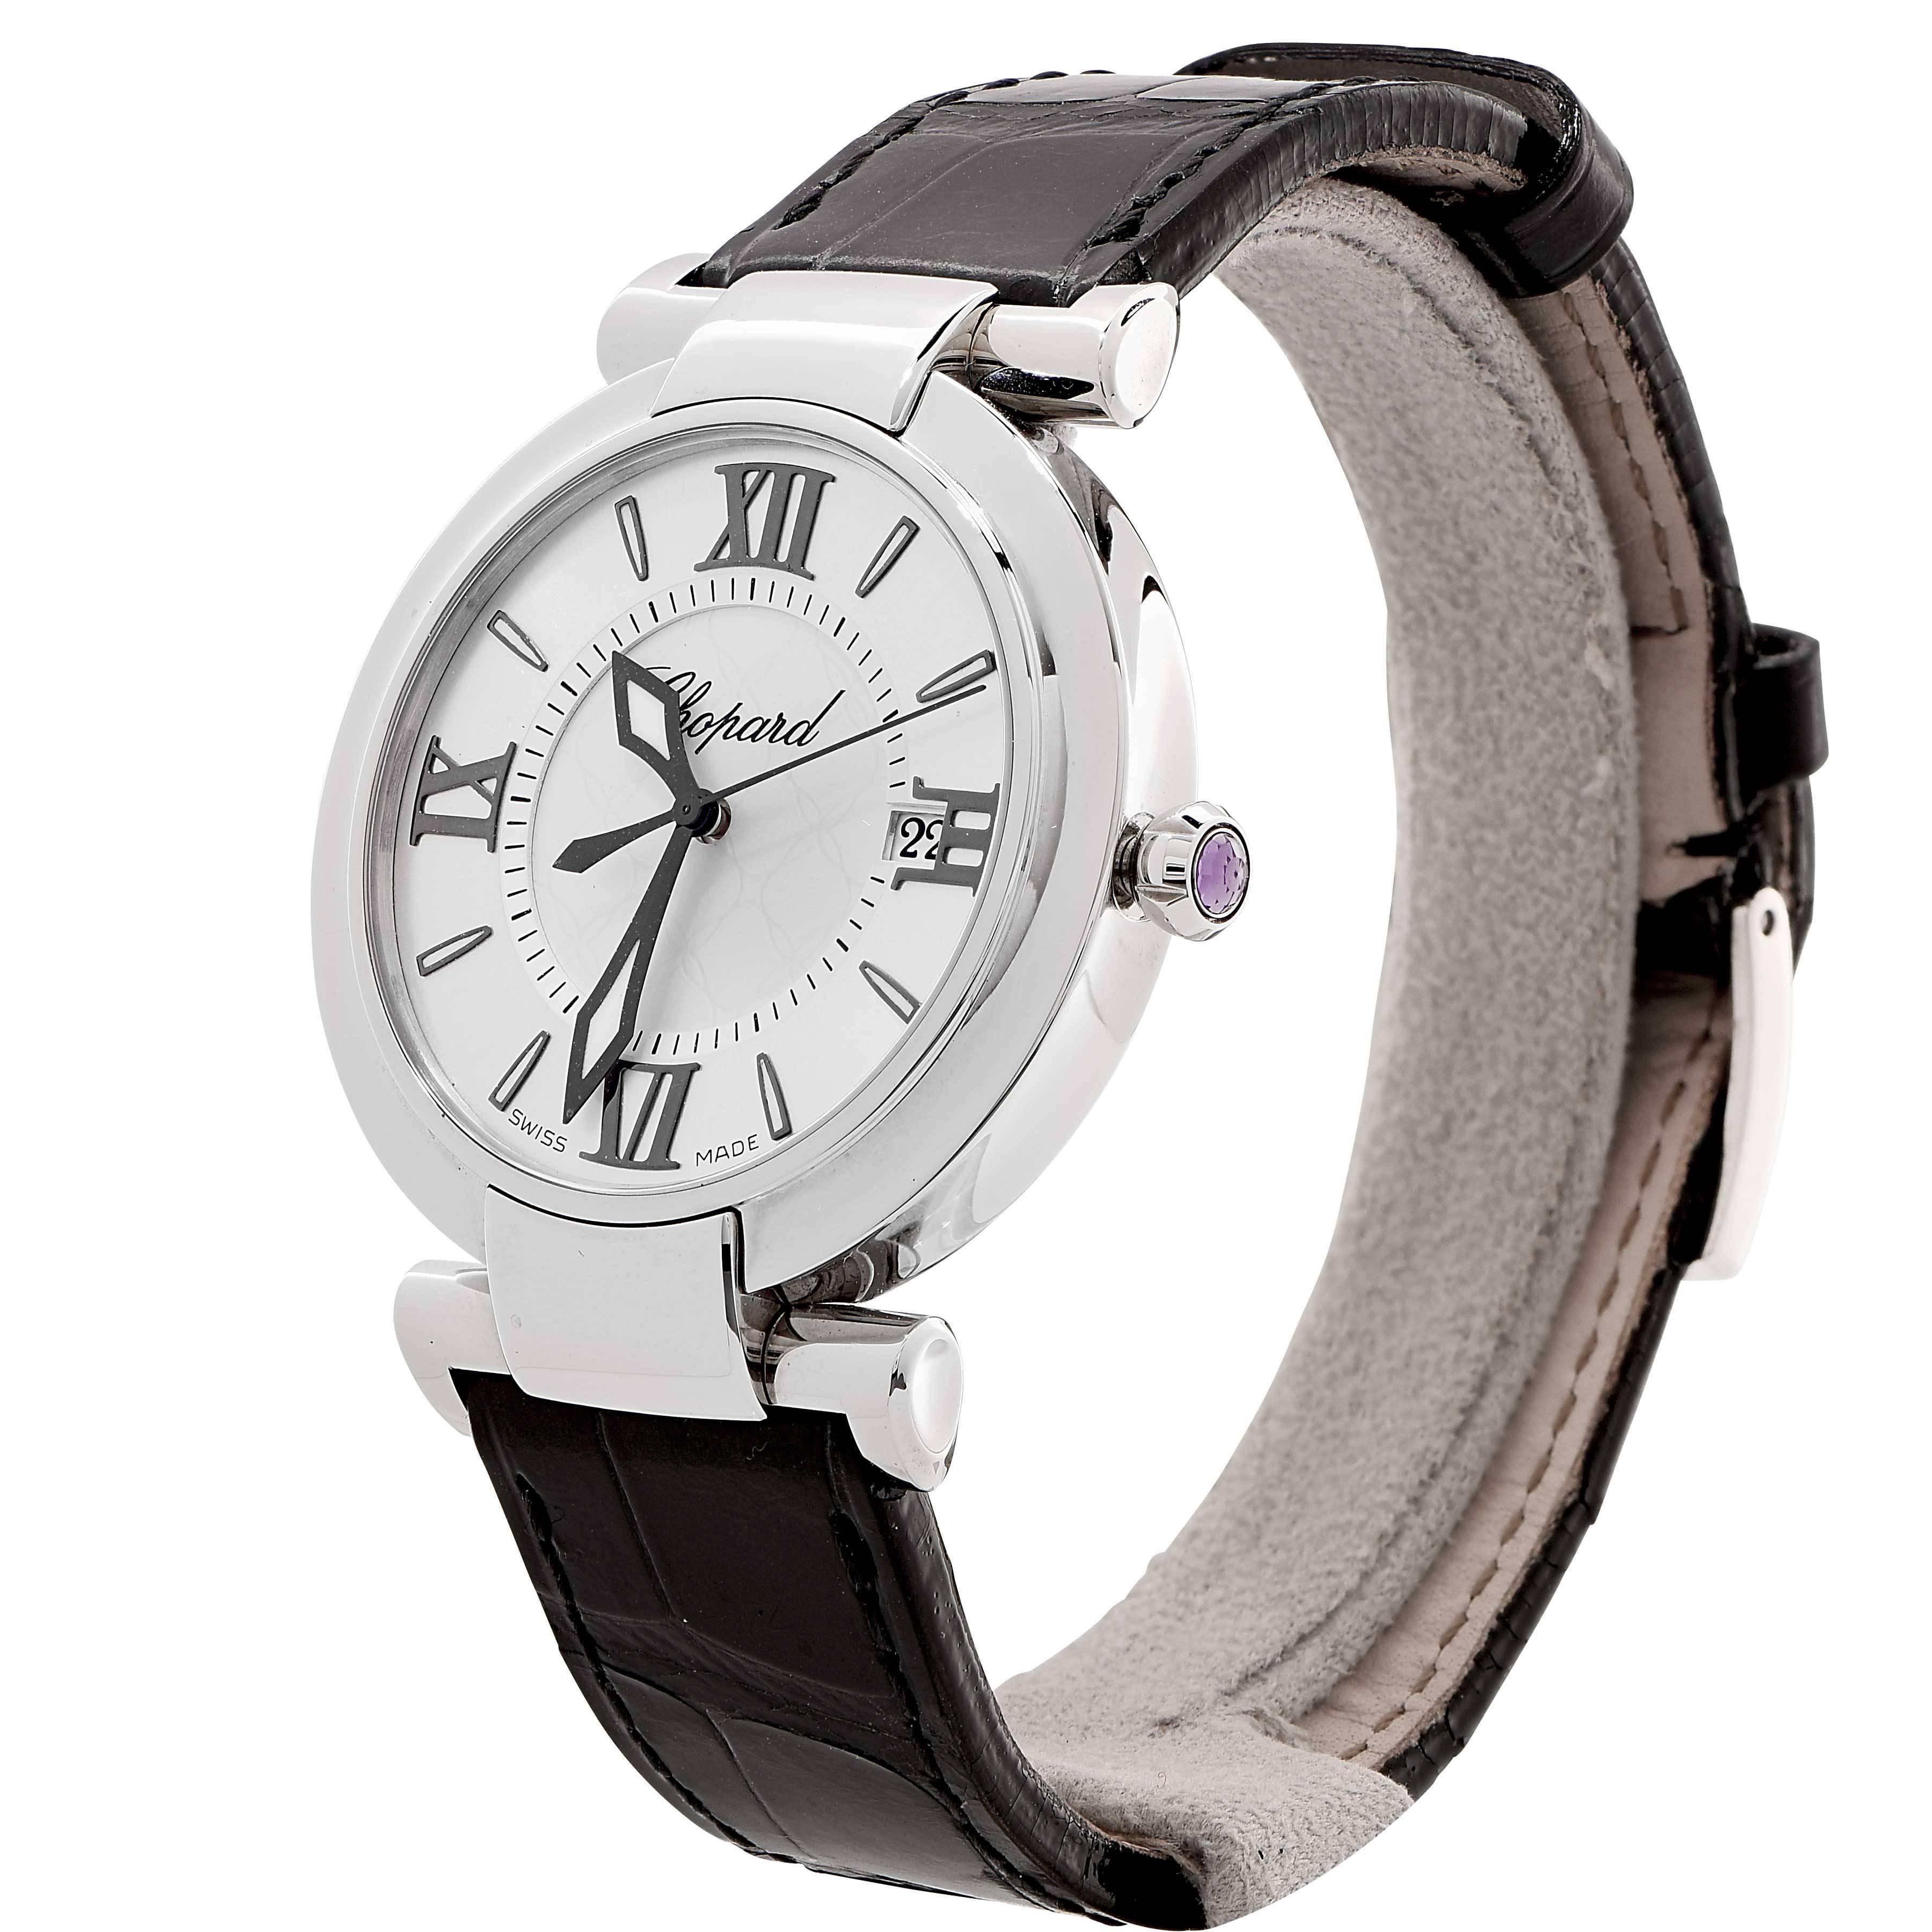 Brand new Chopard Imperiale Stainless Steel Lady's watch with a silvered dial .
36mm 
The IMPERIALE watch in stainless steel is the ultimate in refined design. On the generously proportioned silver-toned dial, its finely curved hands inspired by the